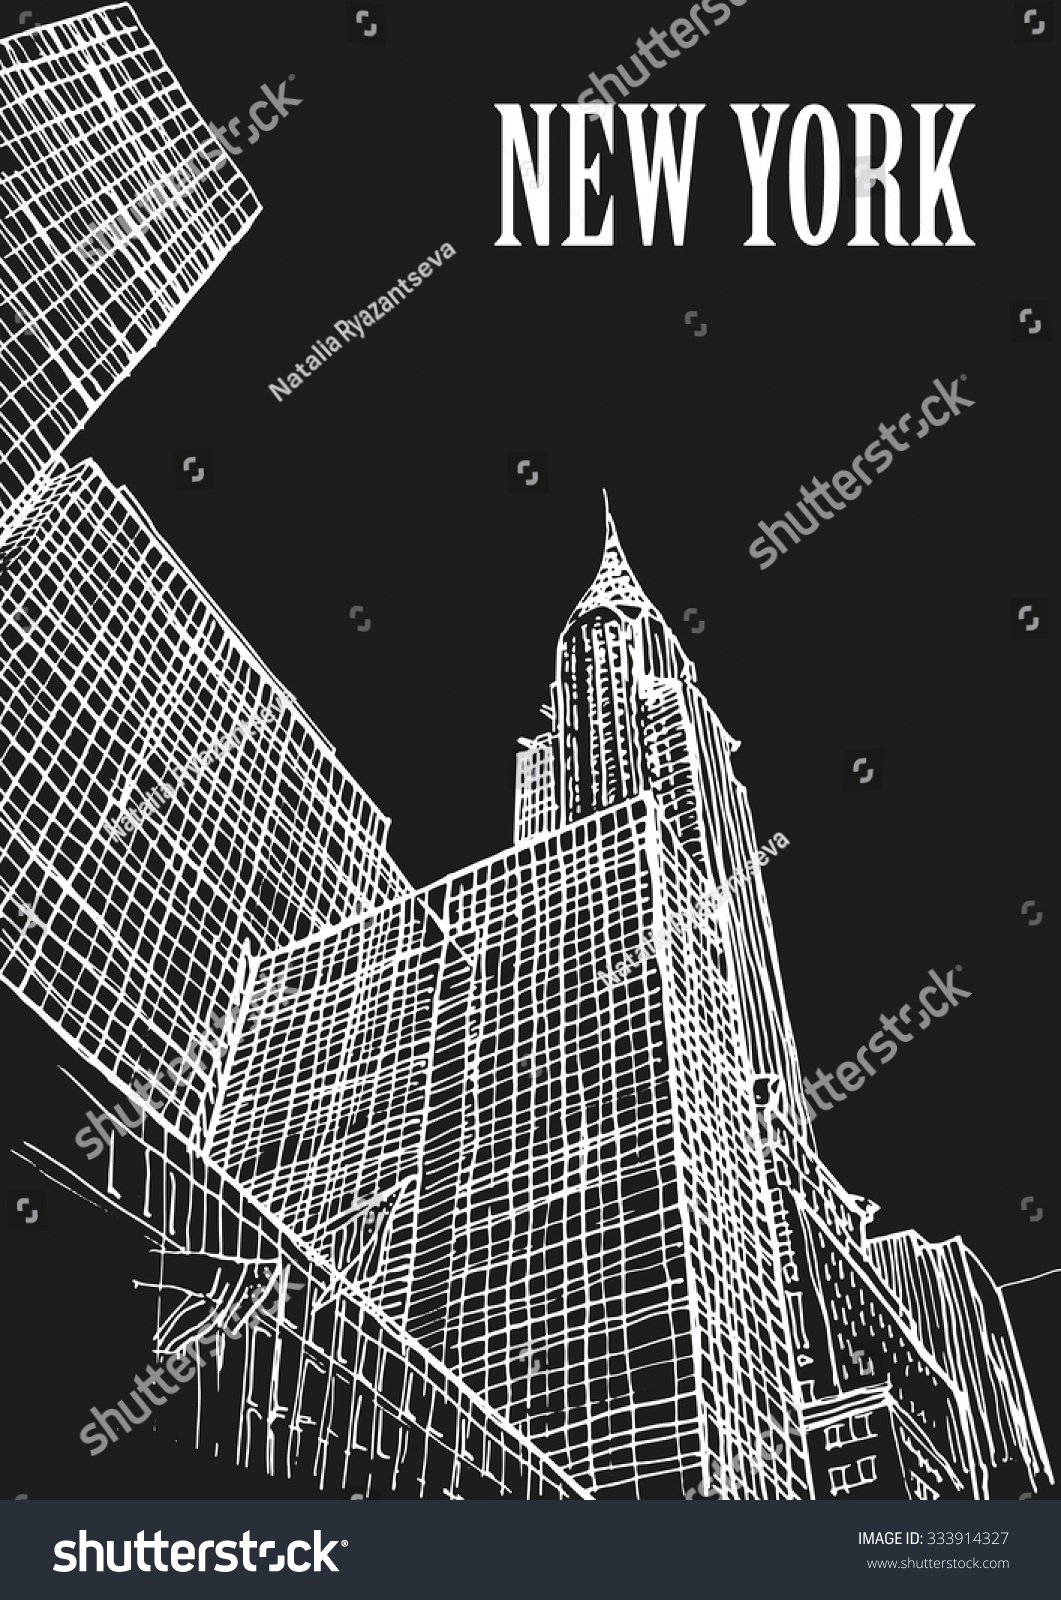 SVG of Chrysler building, New York skylines, USA. Ink sketch, hand drawing, mixed media. svg